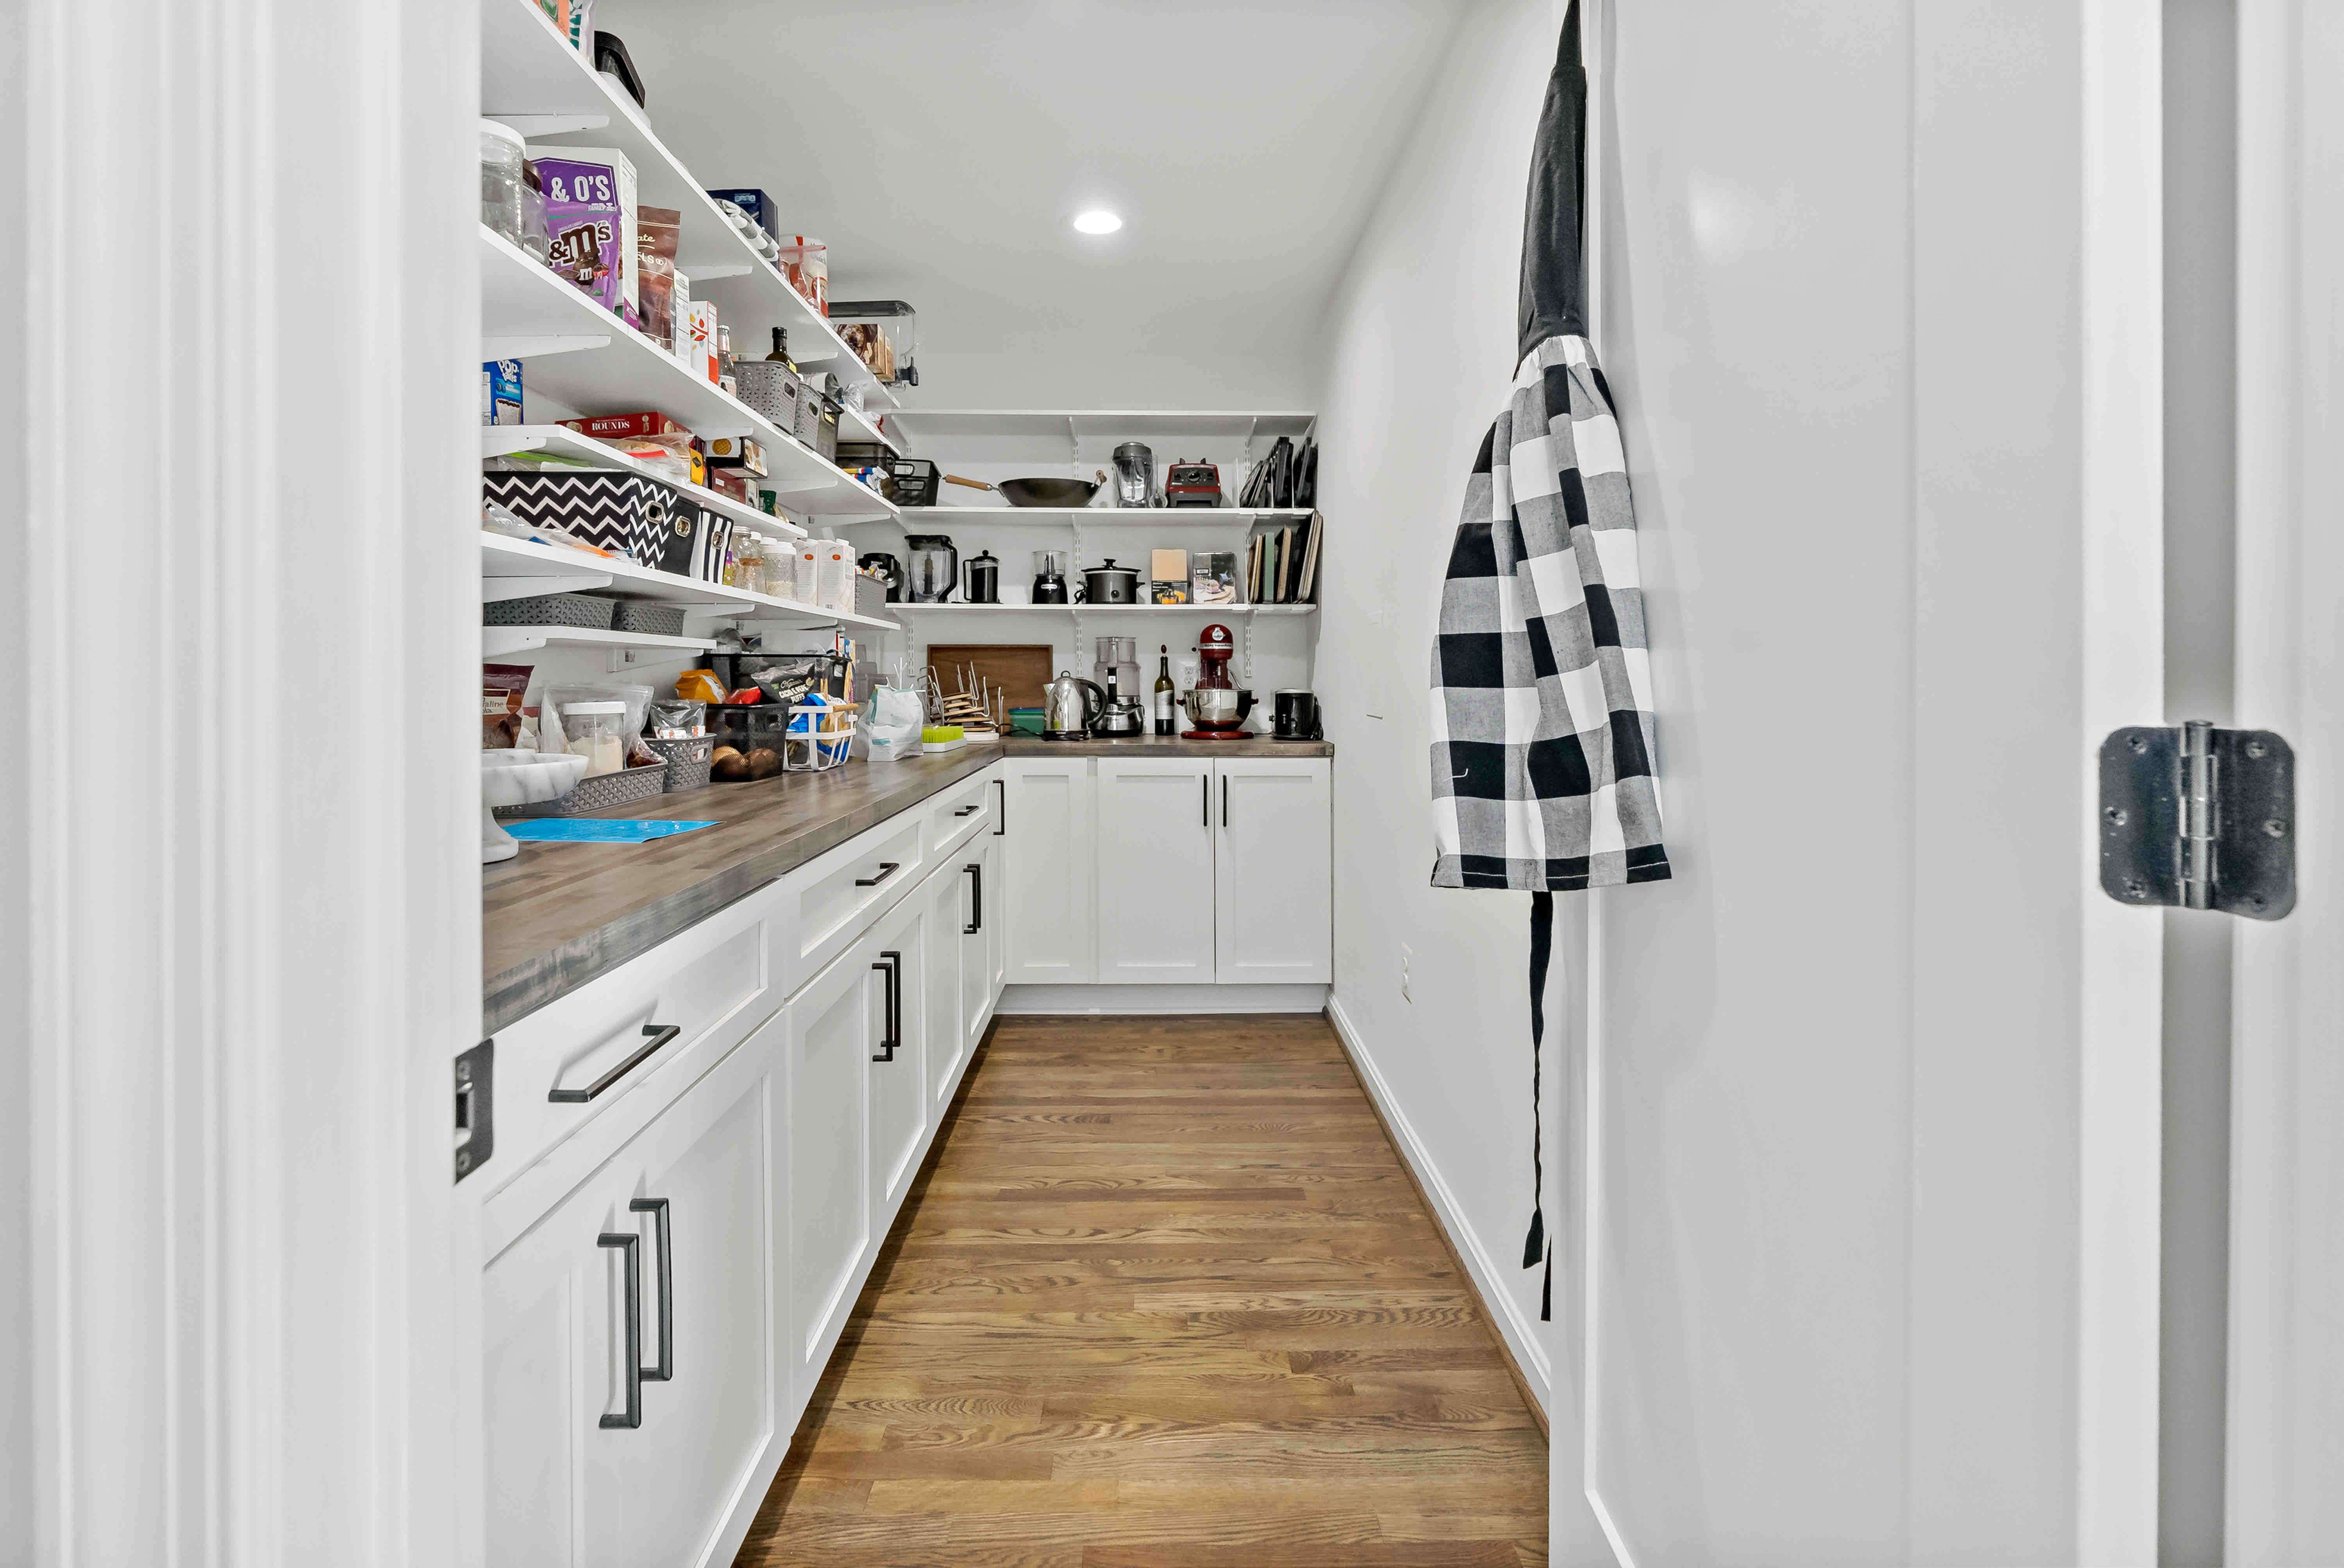 Large kitchen pantry with ample shelves and cabinets